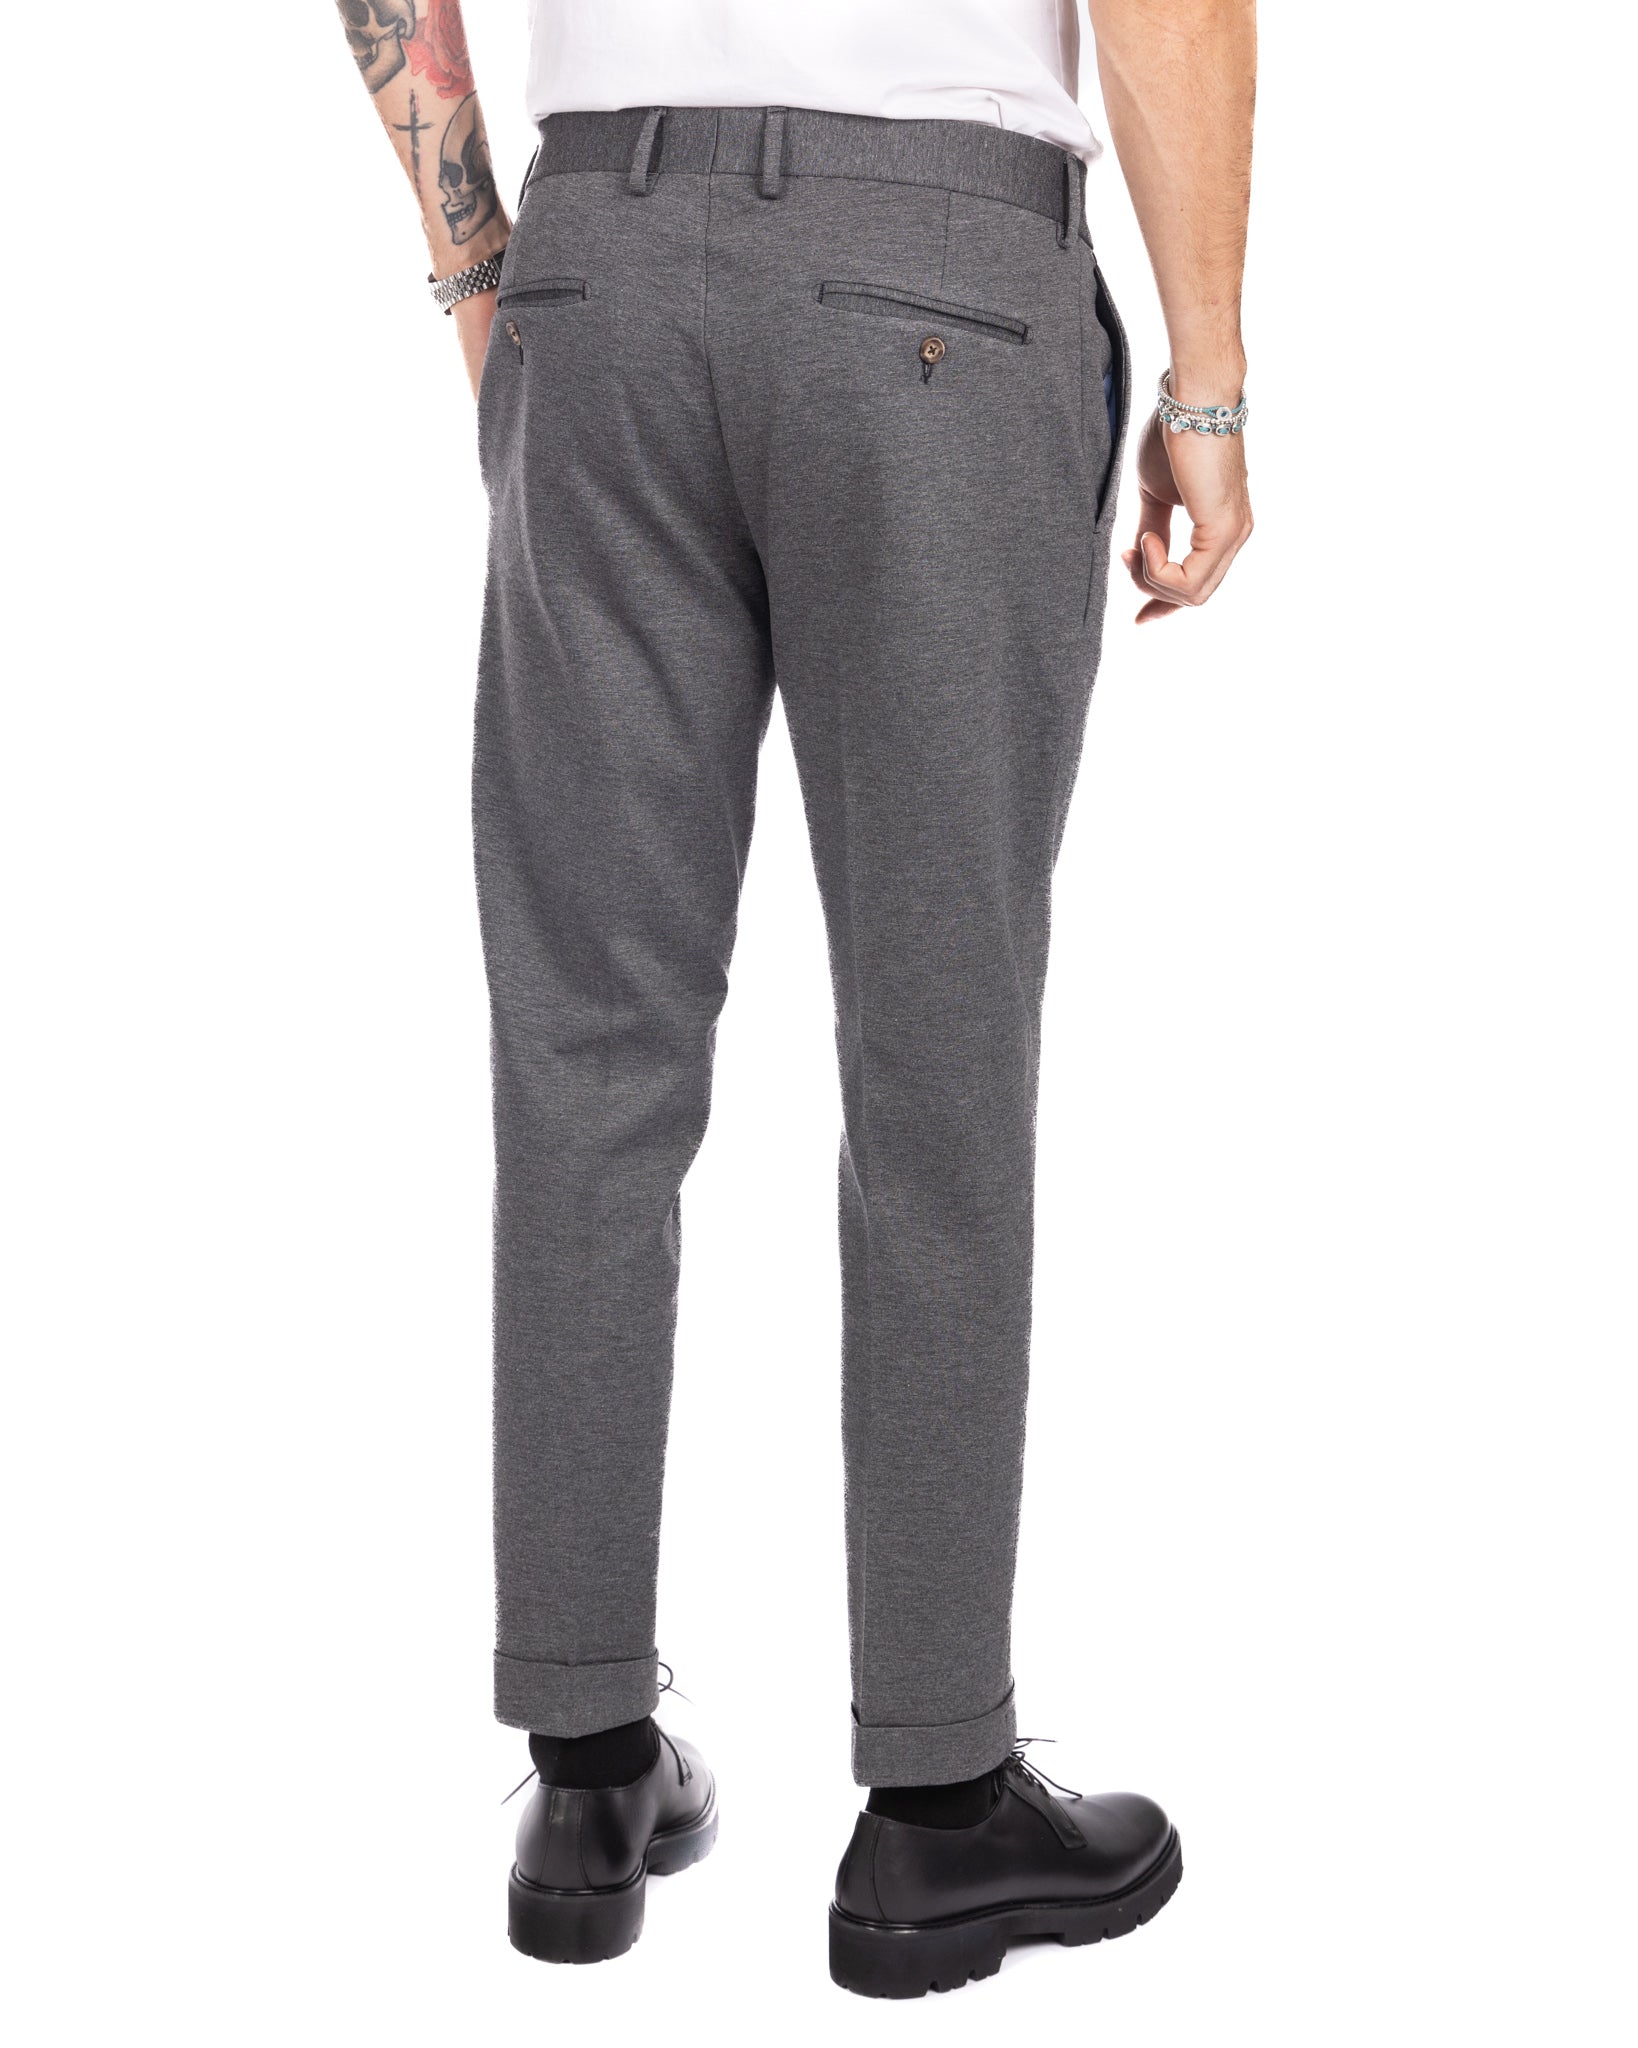 Firenze - trousers with a gray pleat in Milan stitch